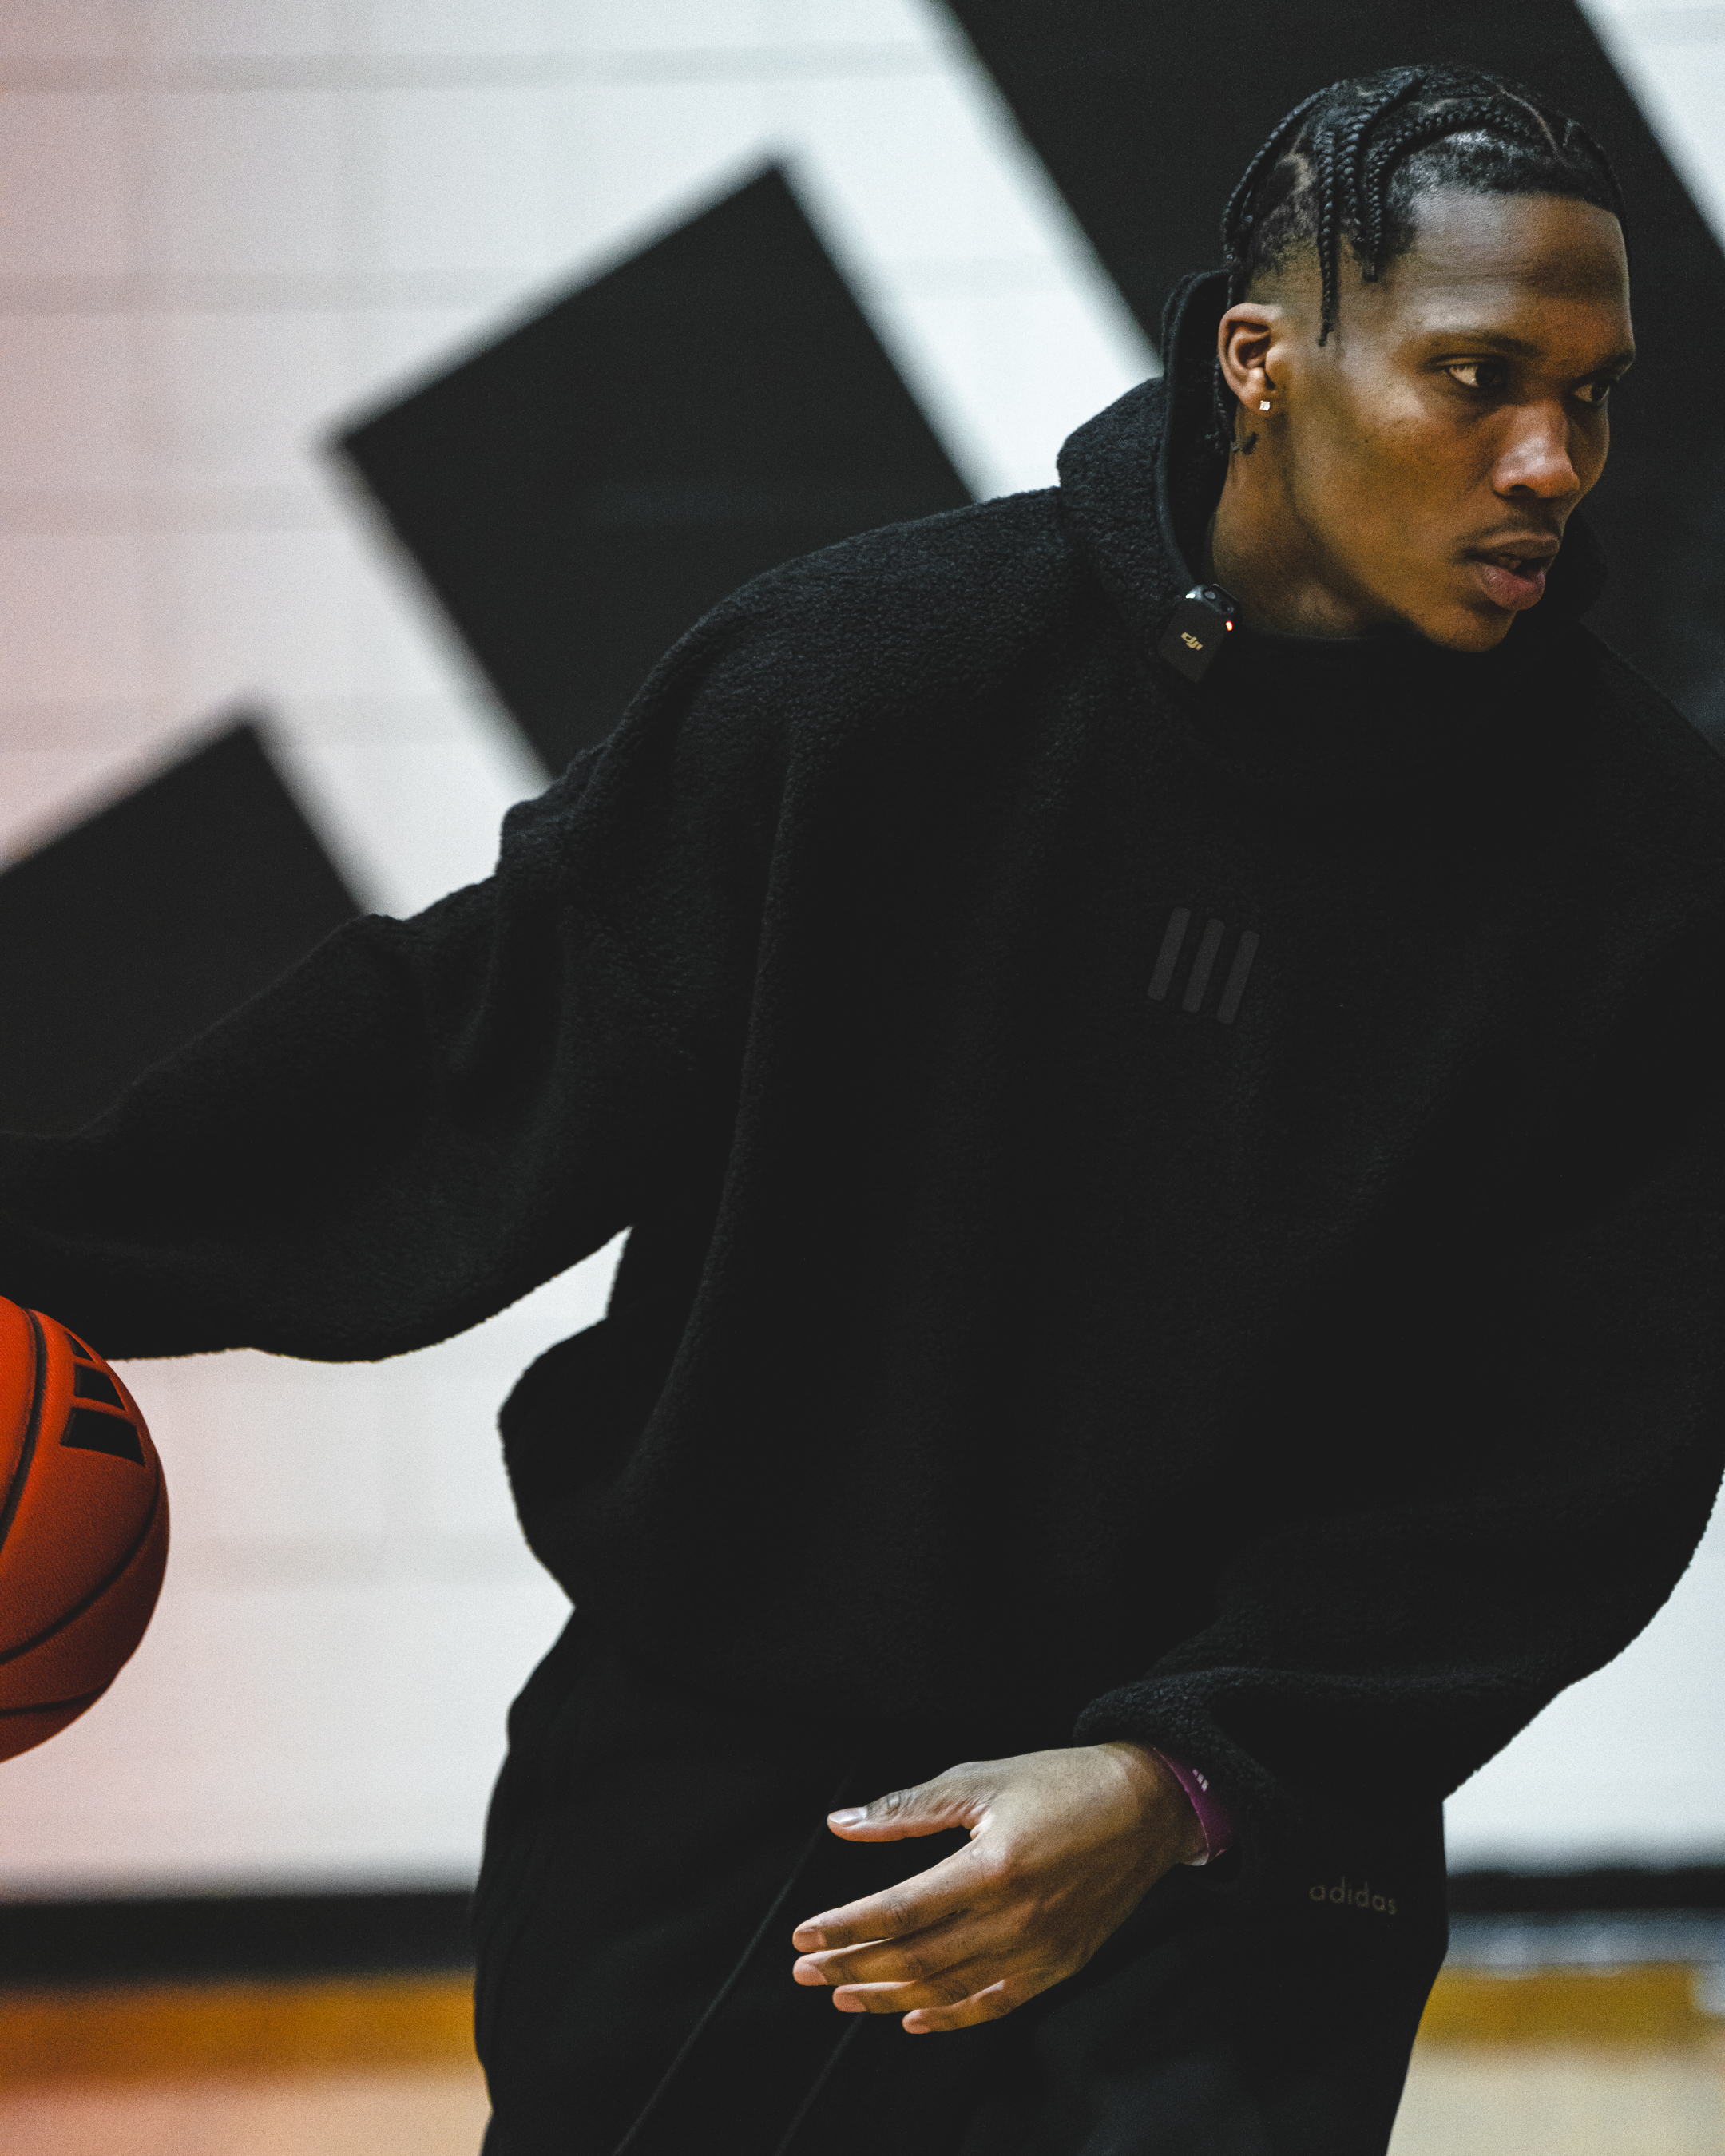 Person in a dark turtleneck holds a basketball, focused on the game ahead